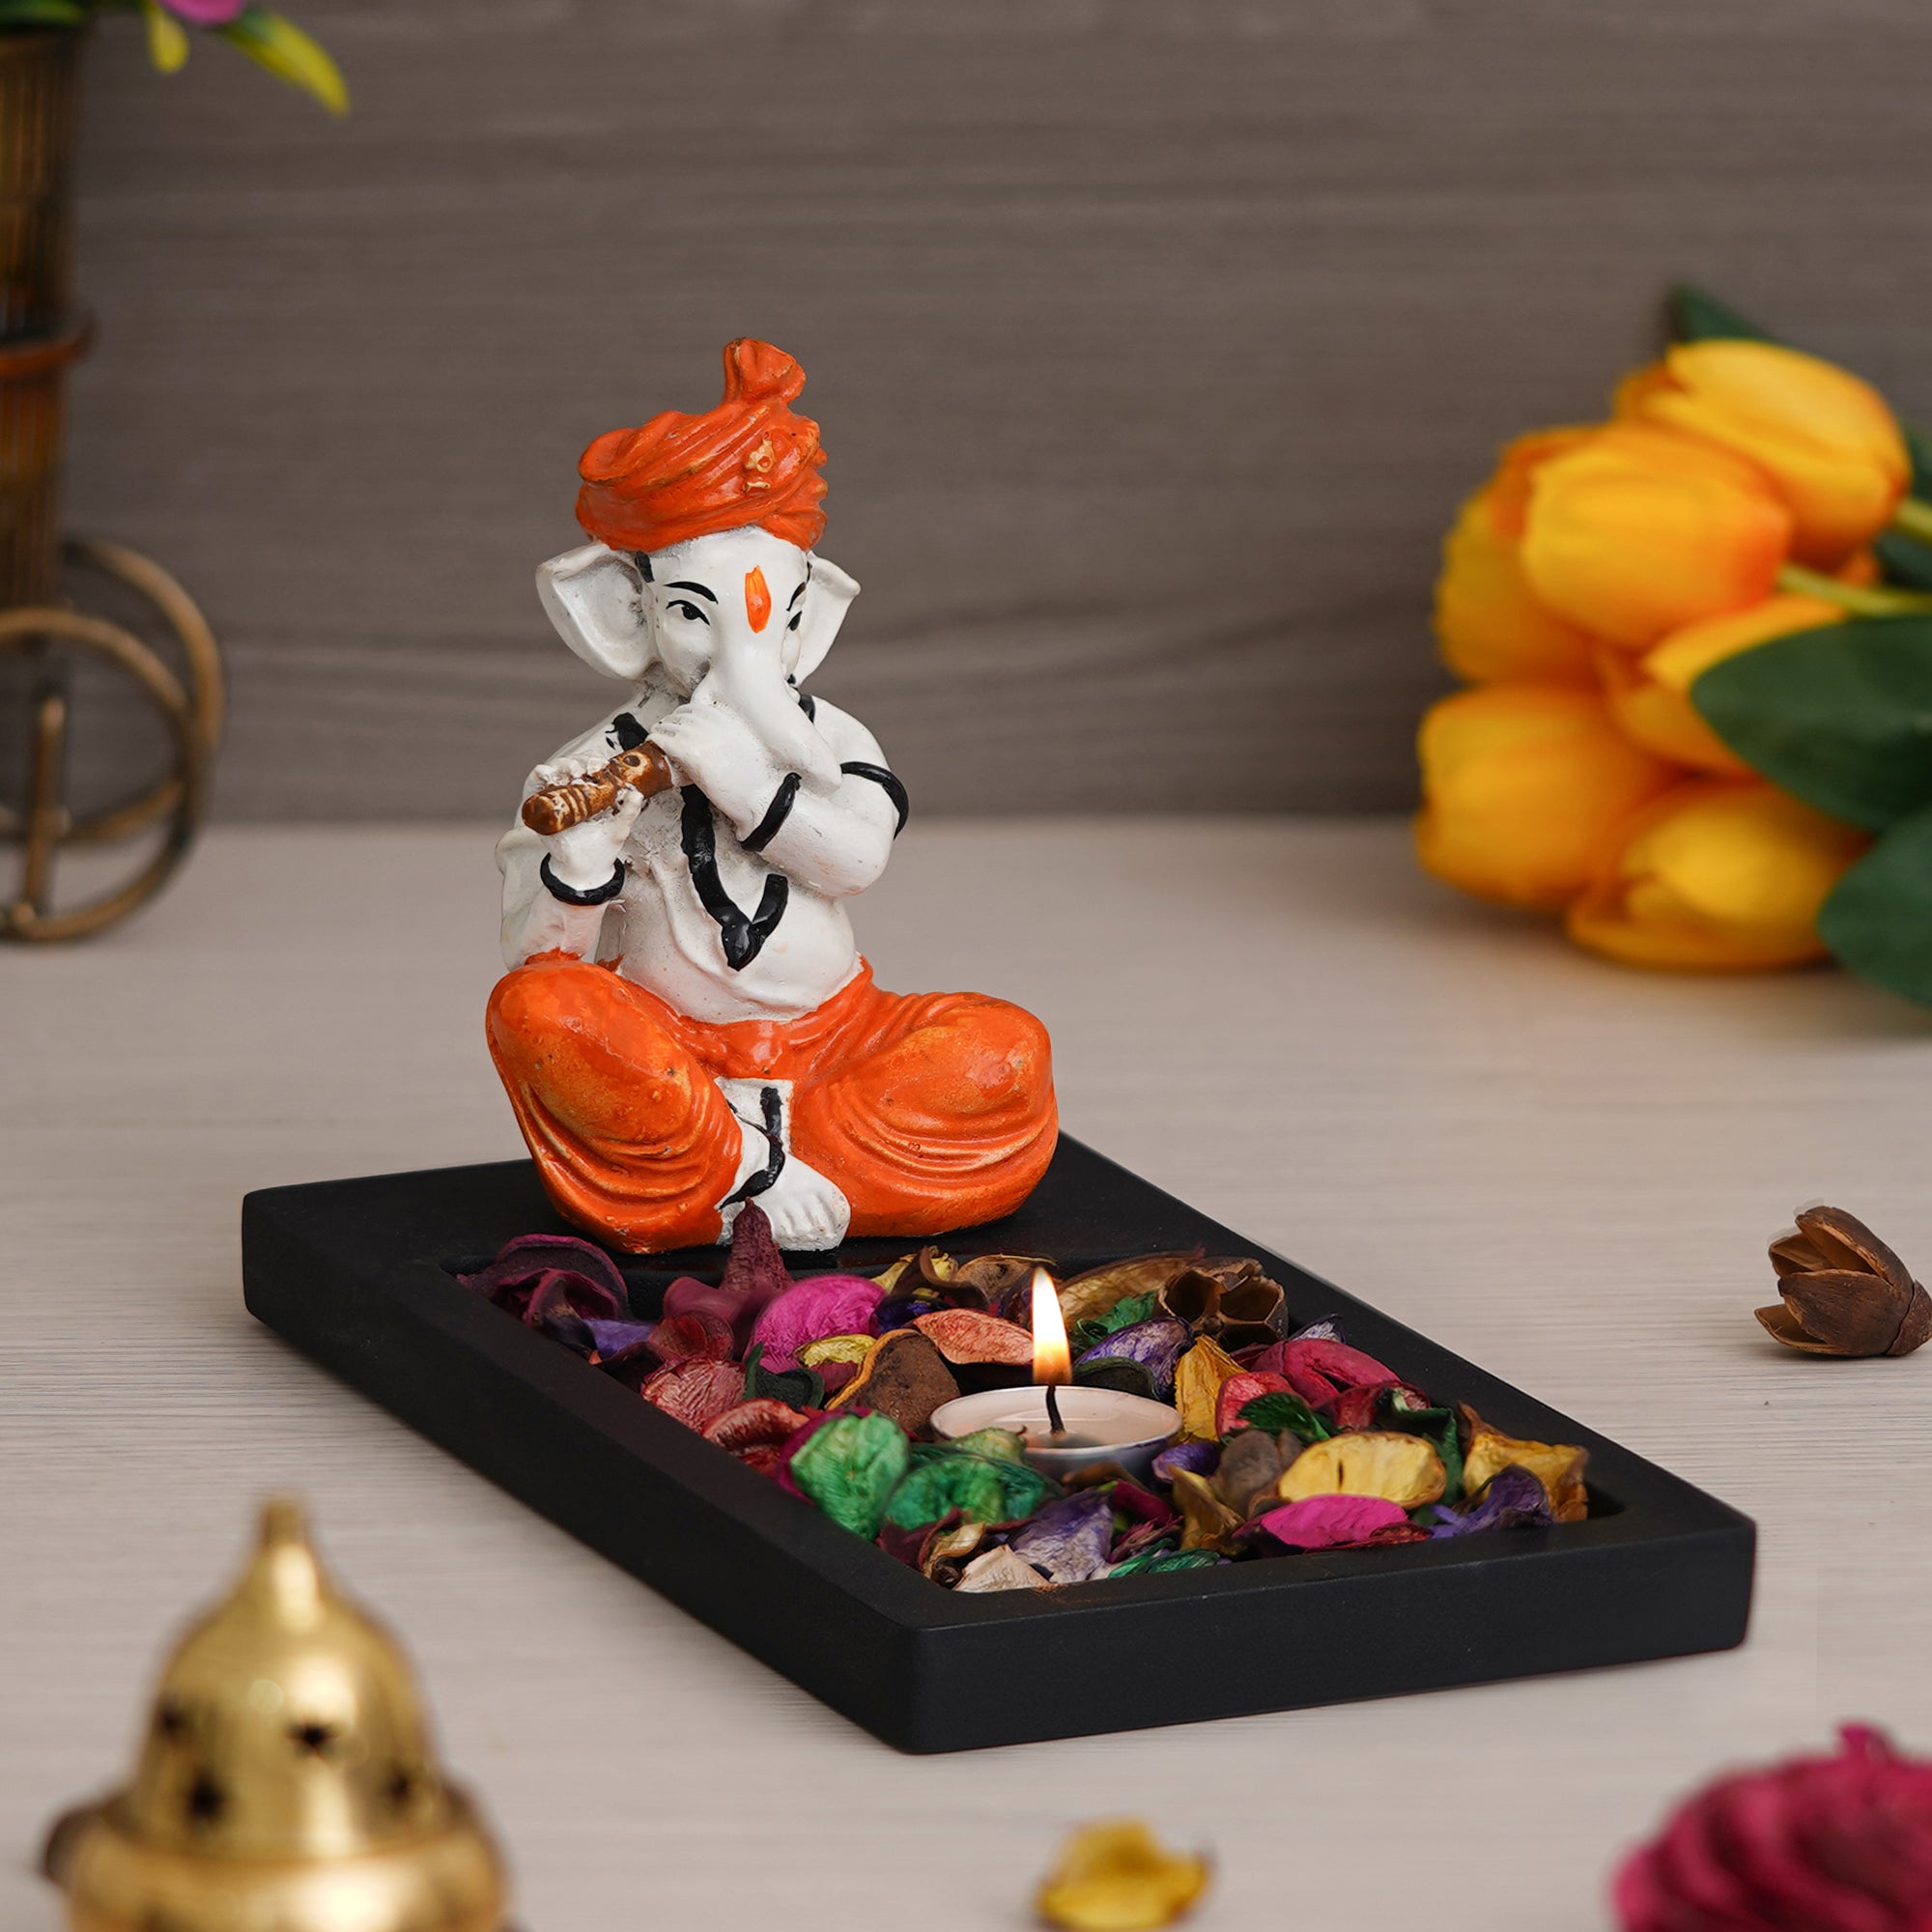 Orange, Brown, White & Black Polyresin Ganesha Playing Flute Showpiece with Rectangle Wooden Base Plate, Fragranced Petals & Tealight